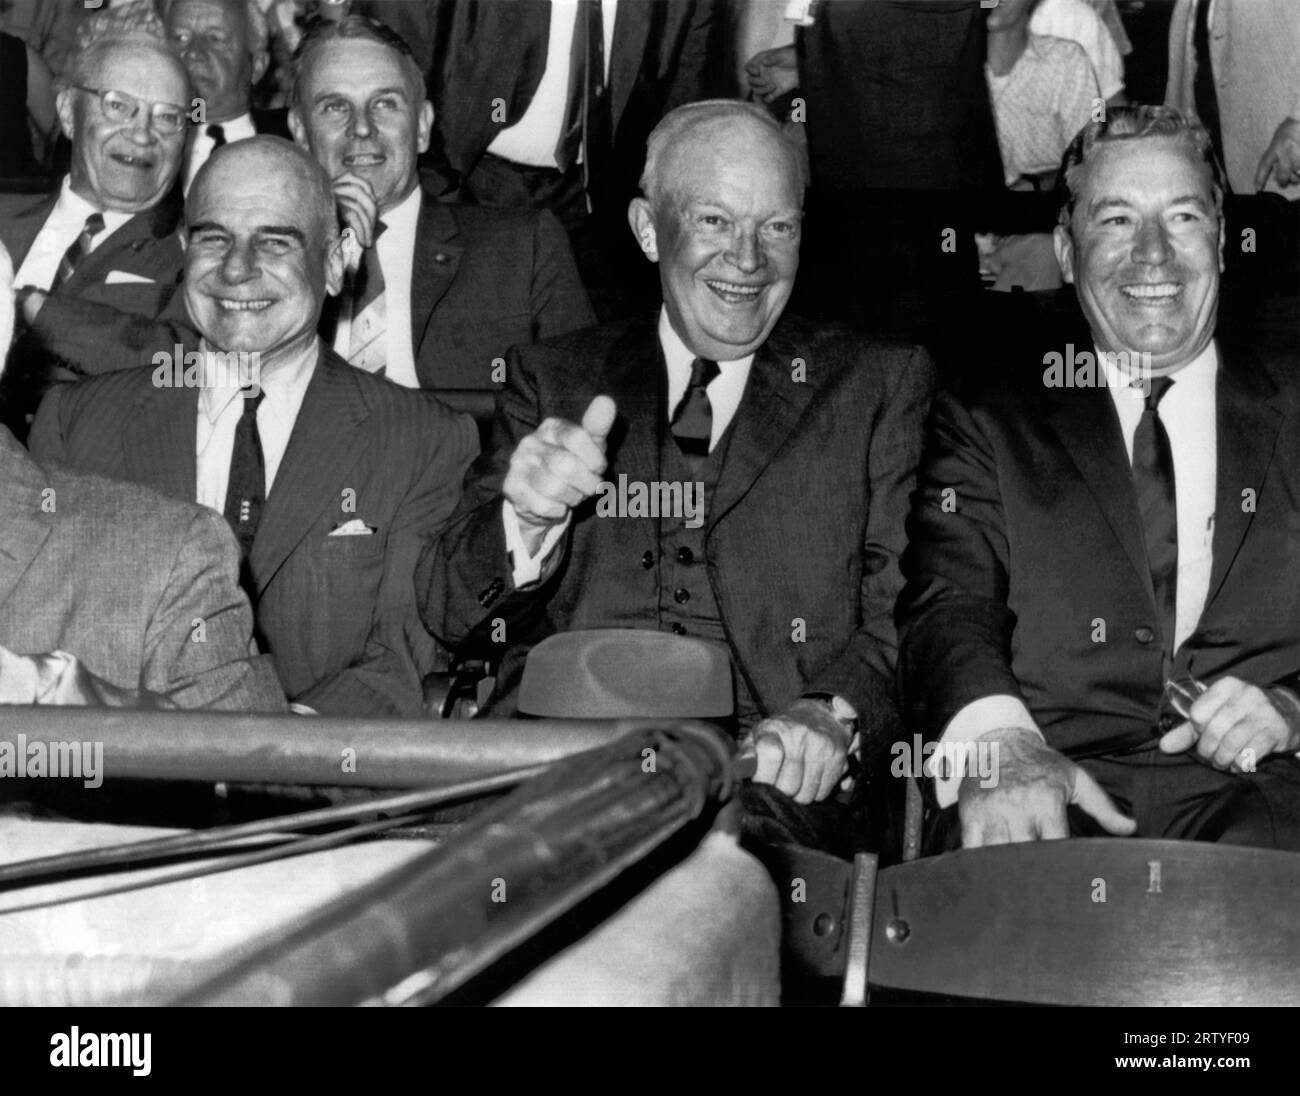 Washington, D.C.   June 6, 1961 D-Day participants attend the Washington-Cleveland baseball game on the anniversary of D-Day. Front row, L-R, is General Jimmy Doolittle, Dwight Eisenhower, and E.R. Quesada, president of the Washington Senators. General Maxwell Taylor is in back of and betweem Doolittle and Eisenhower. Stock Photo